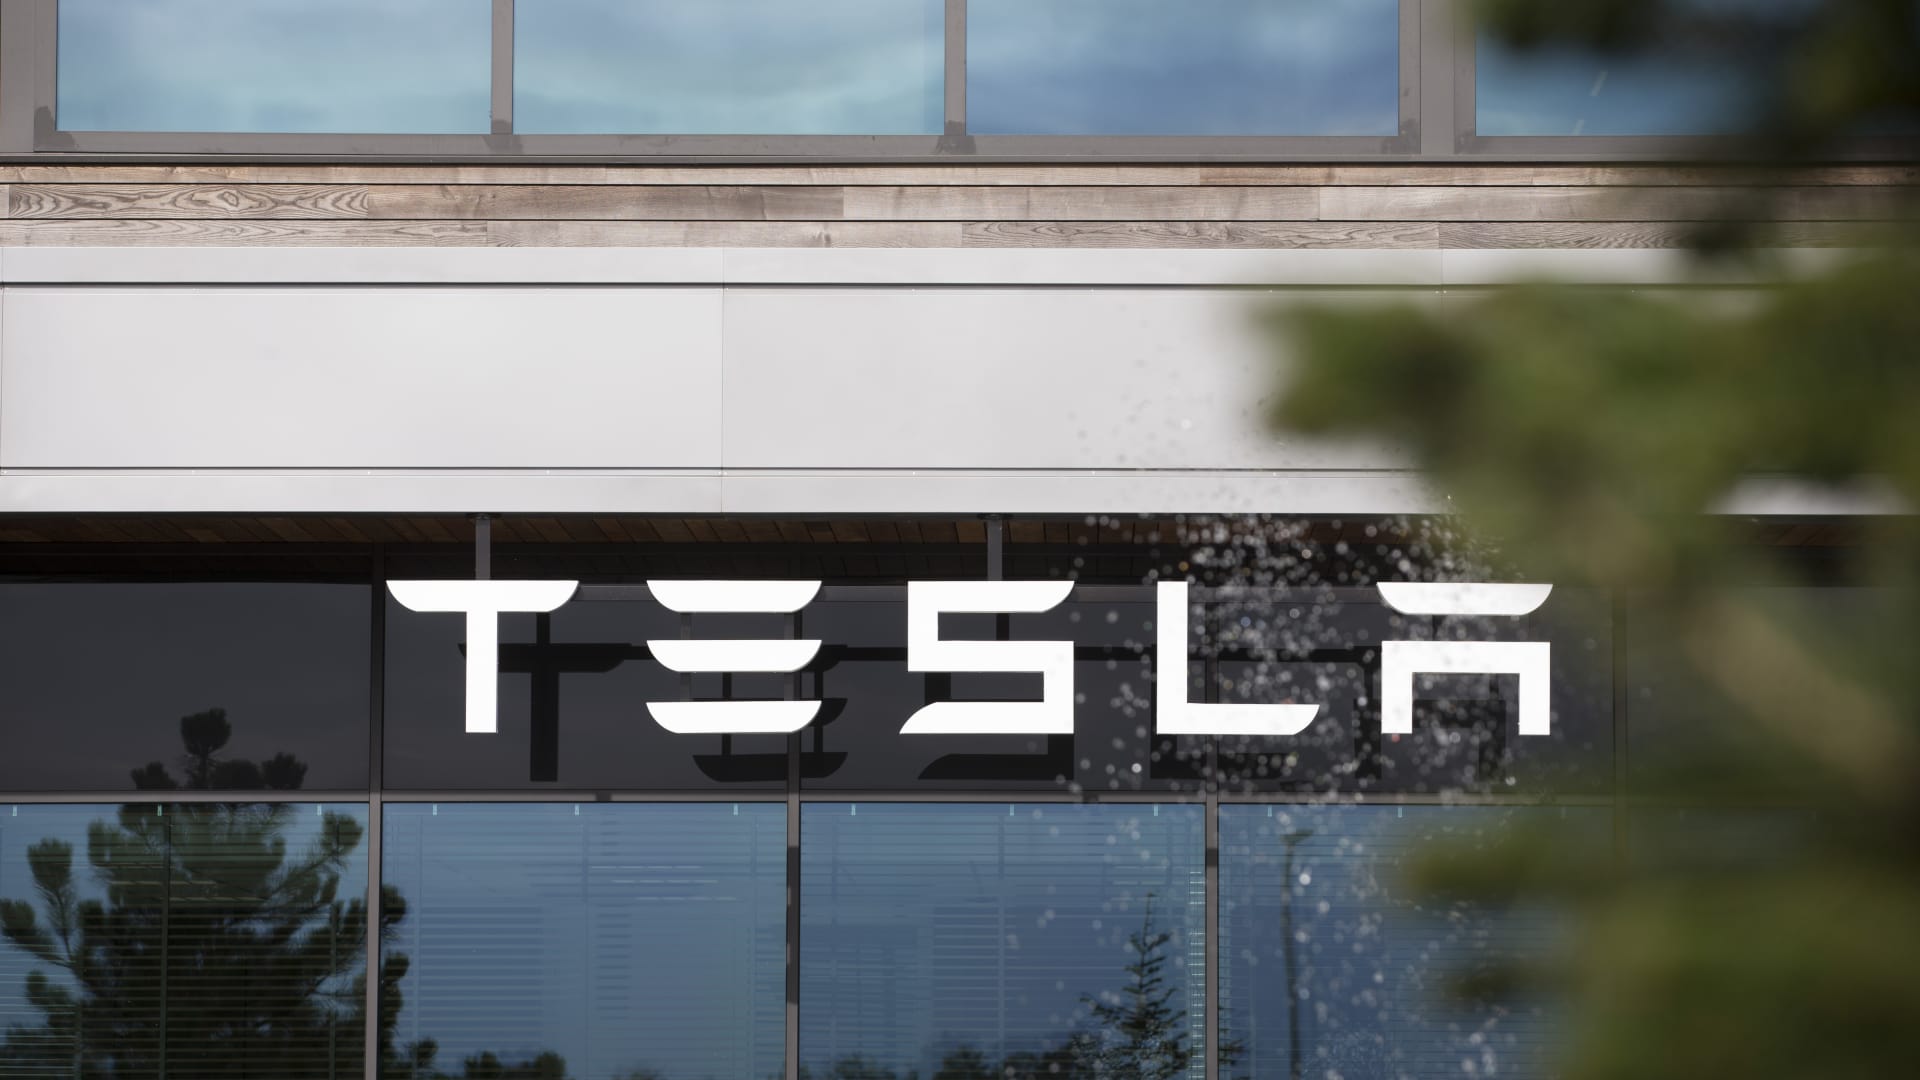 German authorities looking into possible data protection violations by Tesla, newspaper reports